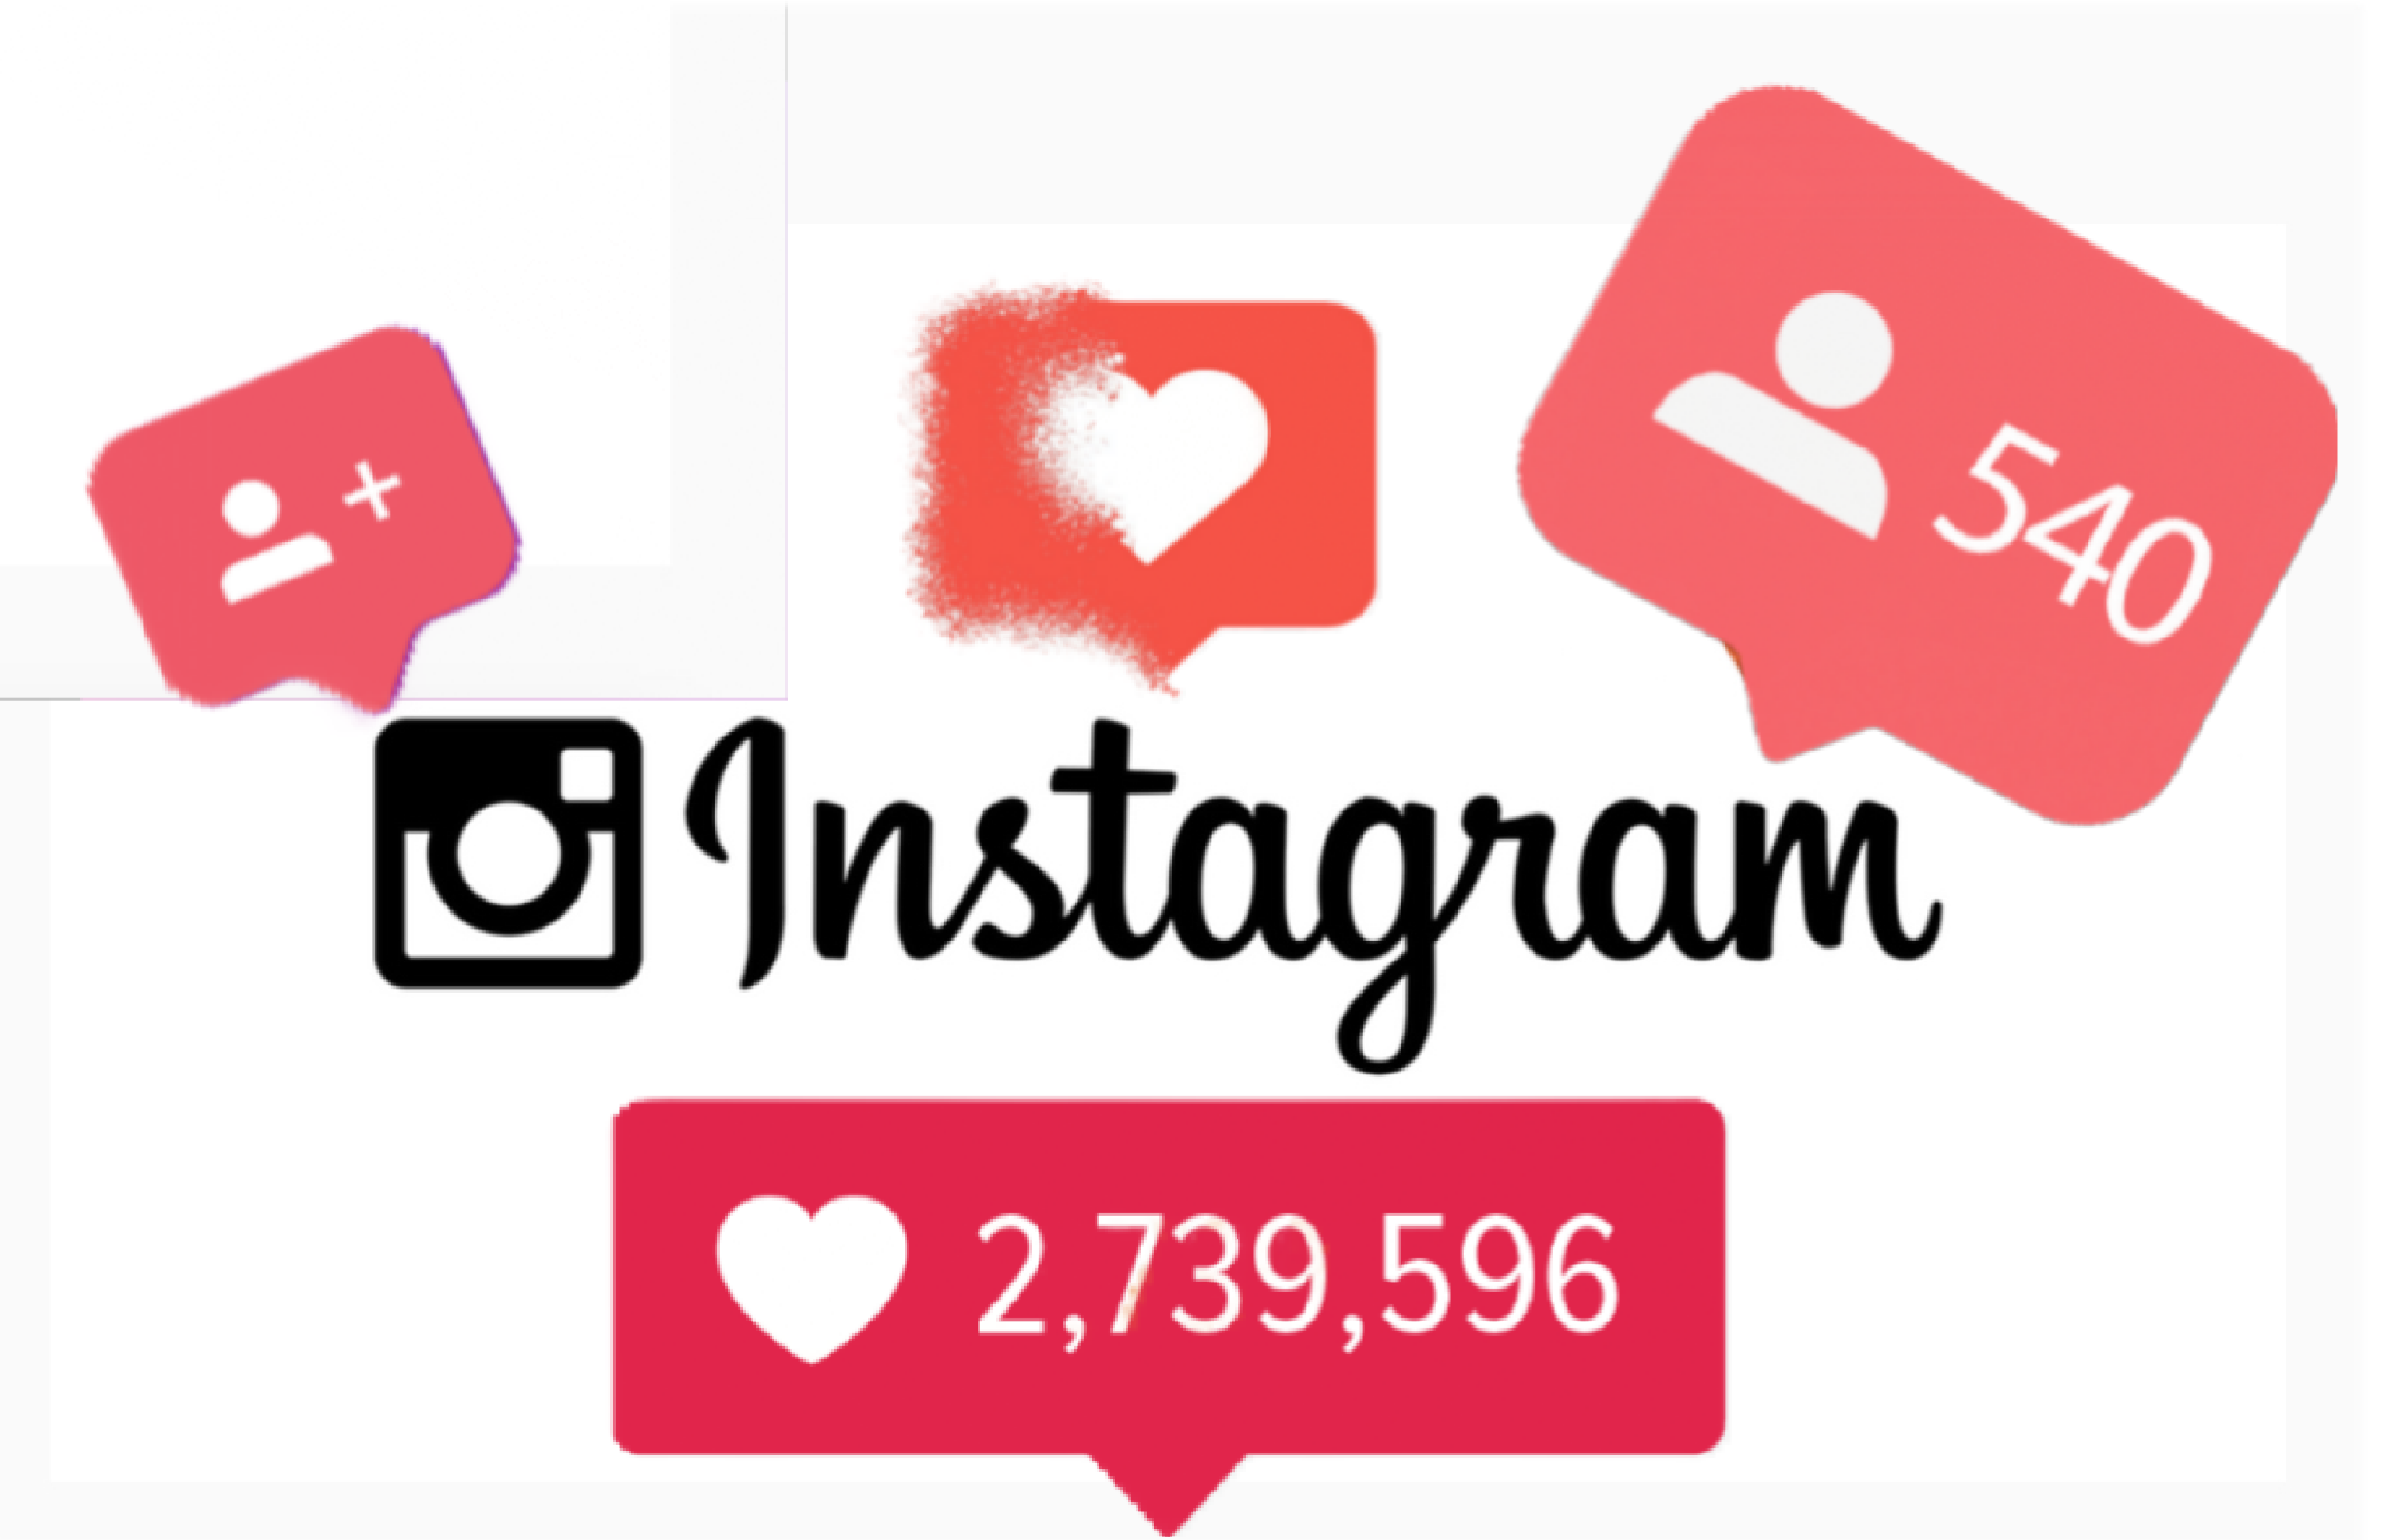 How to get more Instagram followers for free?